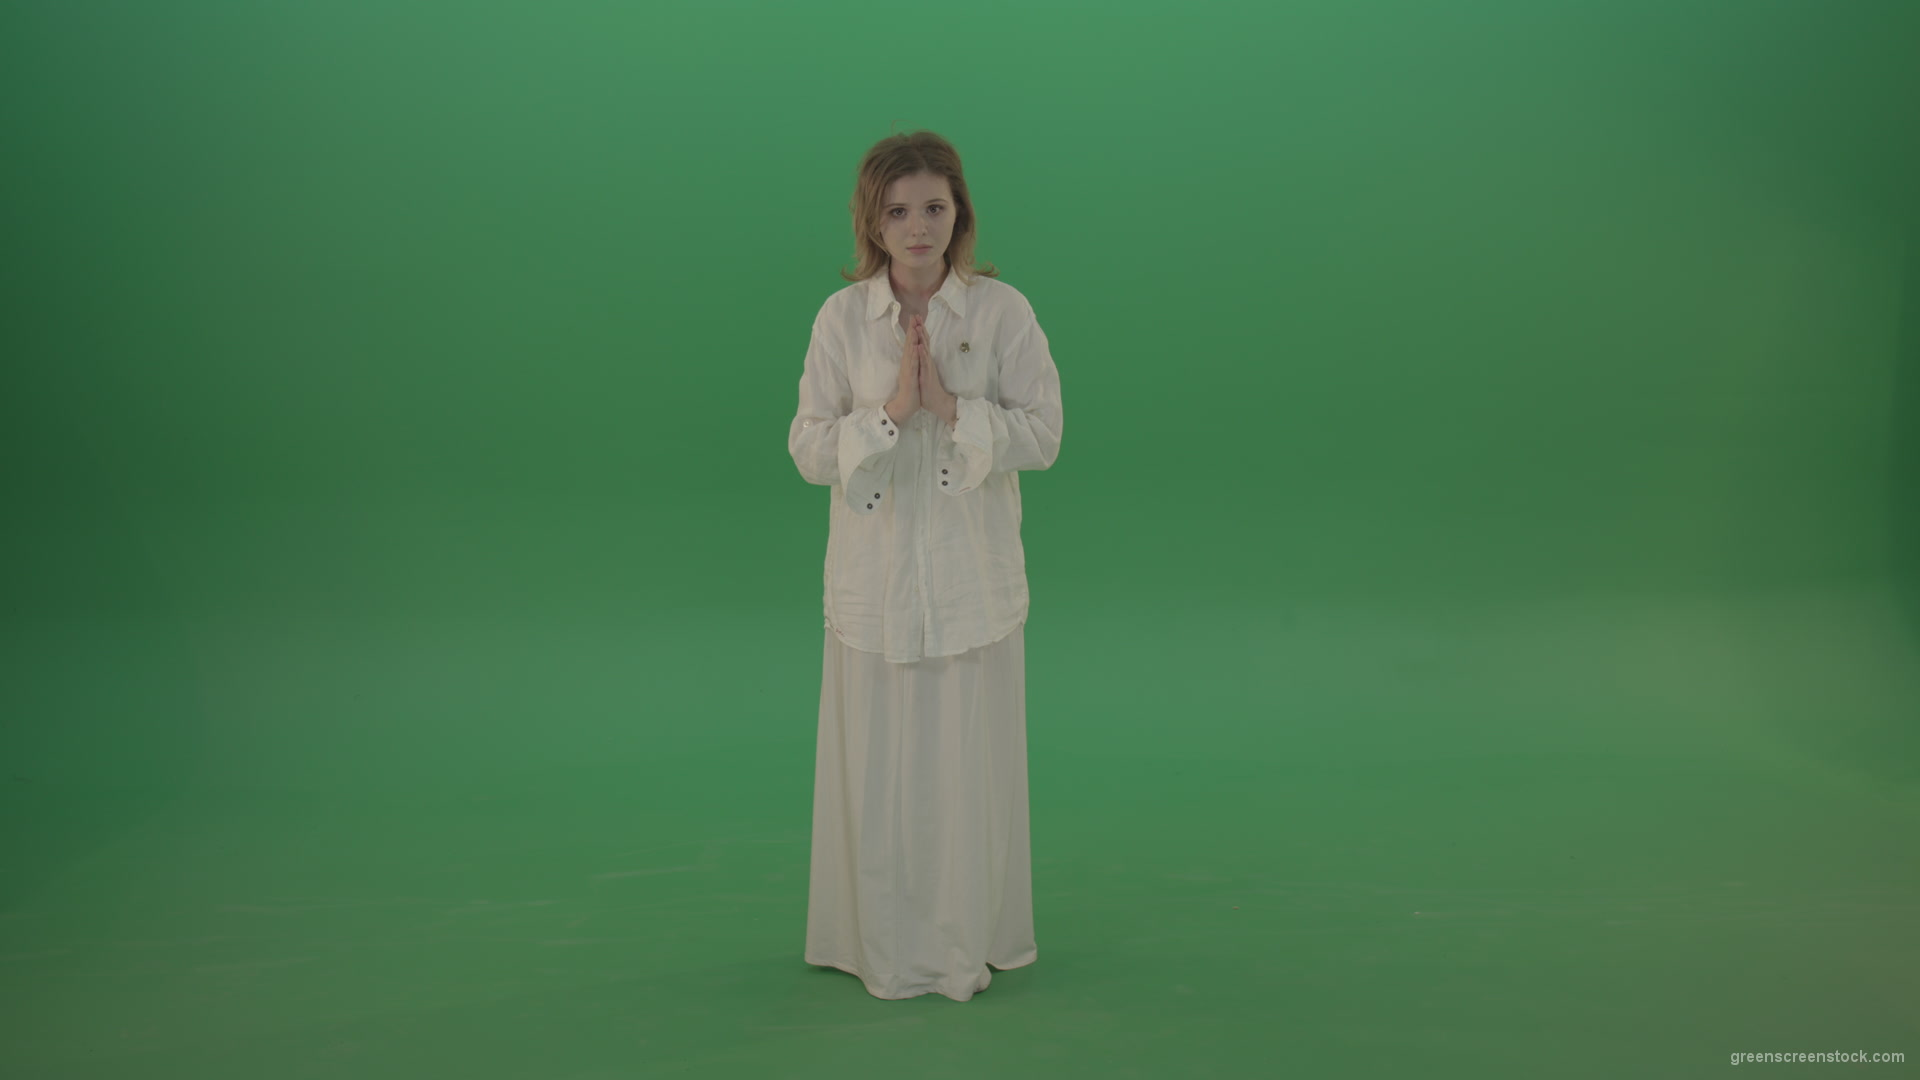 Girl-wearing-a-white-suit-pray-to-god-isolated-on-green-background_006 Green Screen Stock